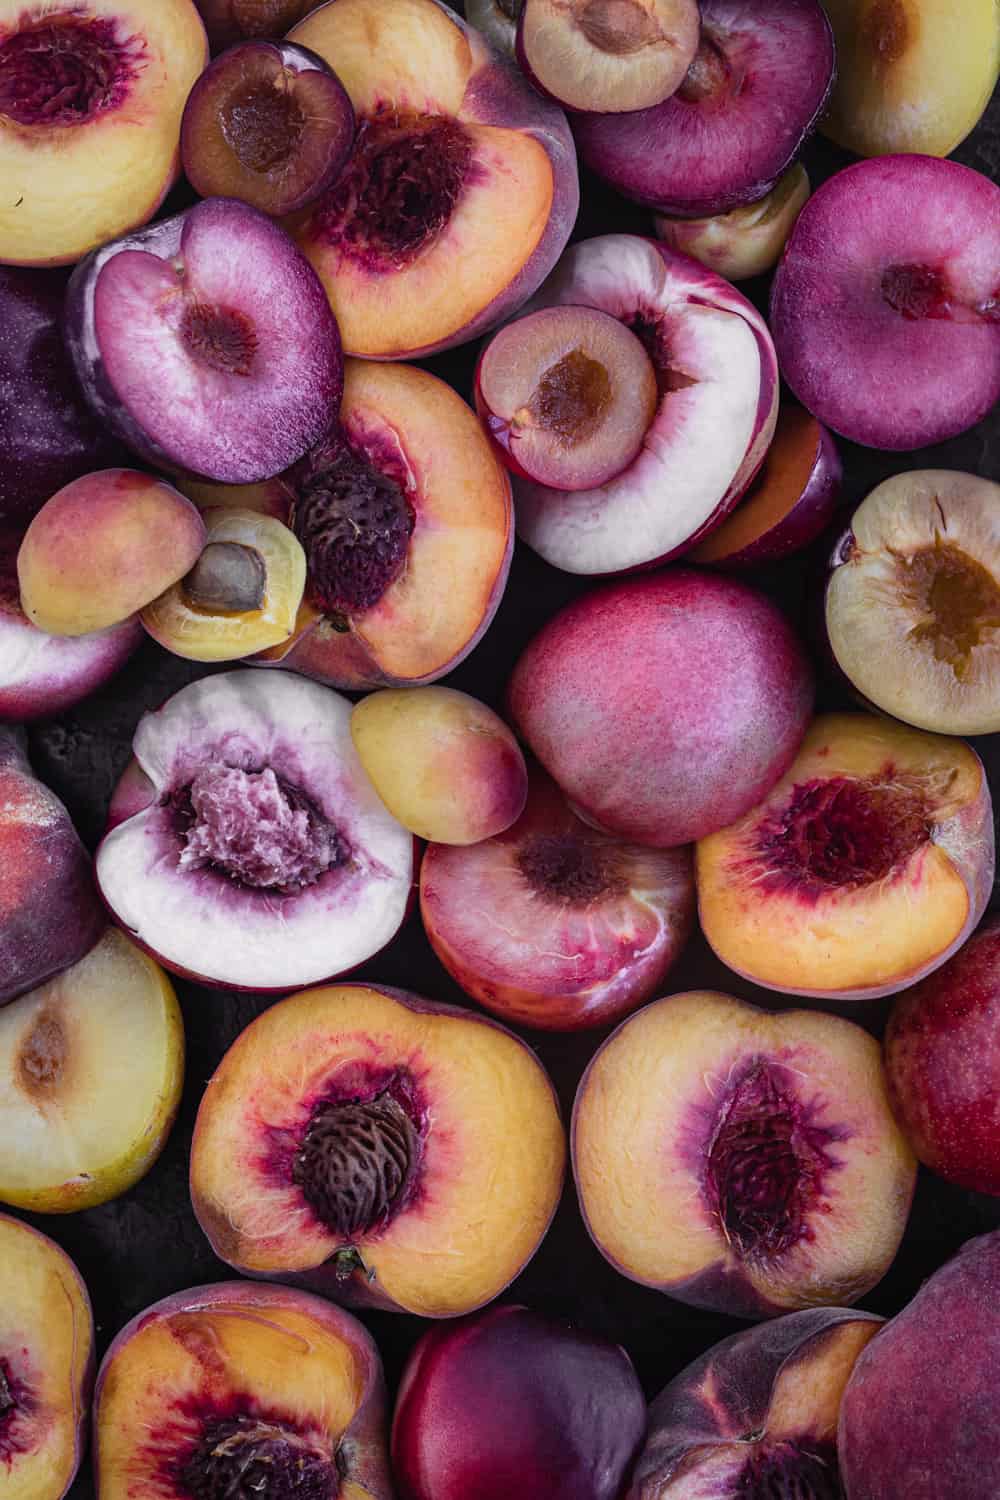 Peaches, nectarines and plums cut in half; overhead shot.